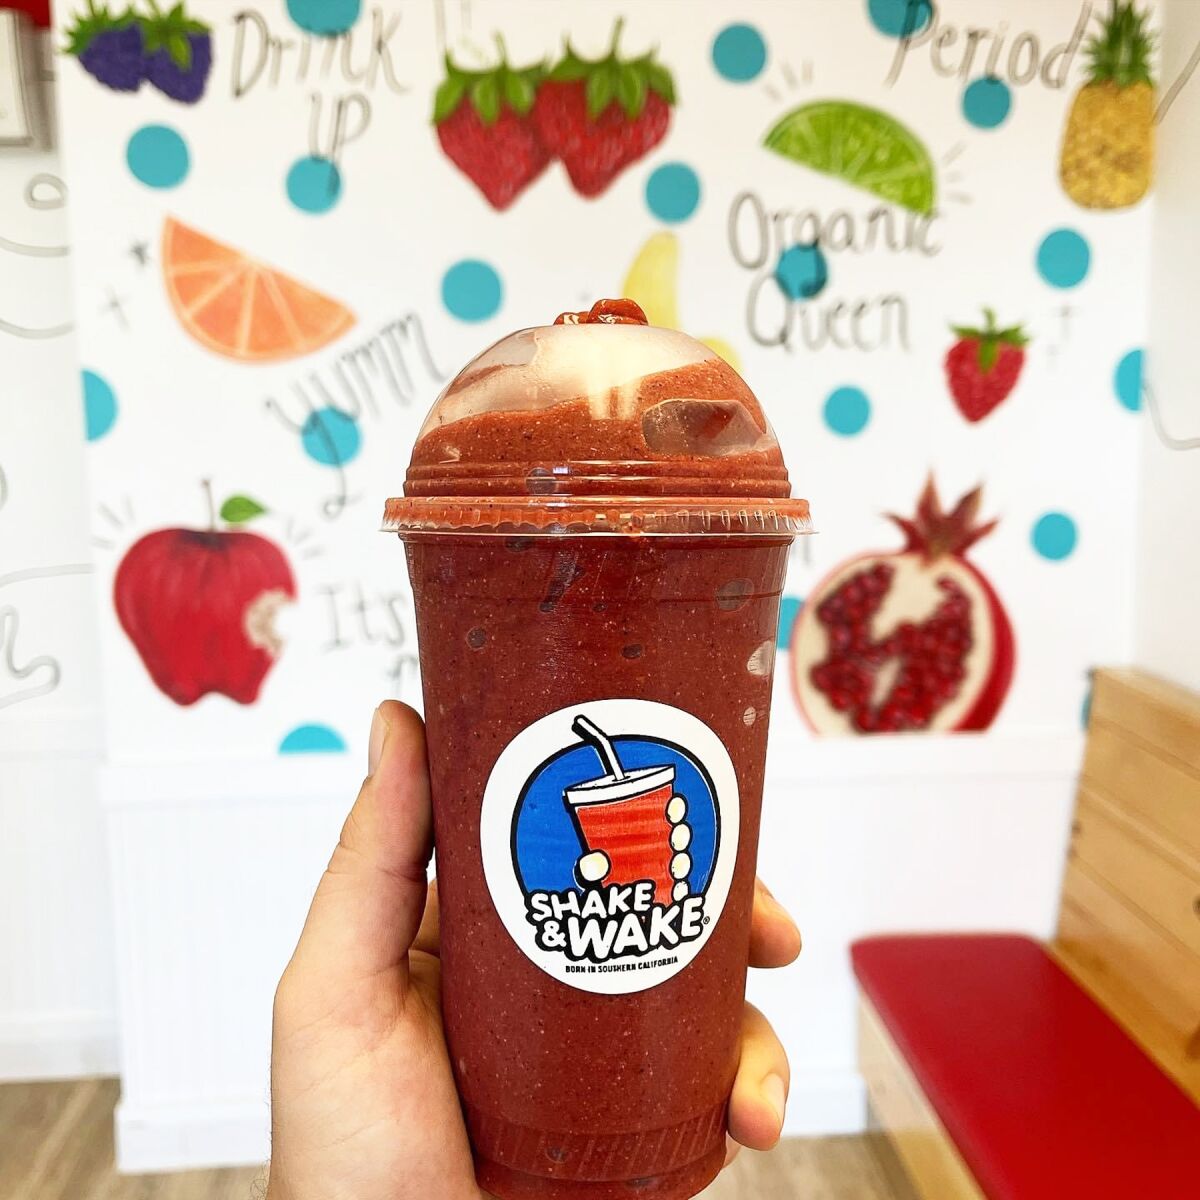 A wide variety of smoothie flavors are available at Shake & Wake.